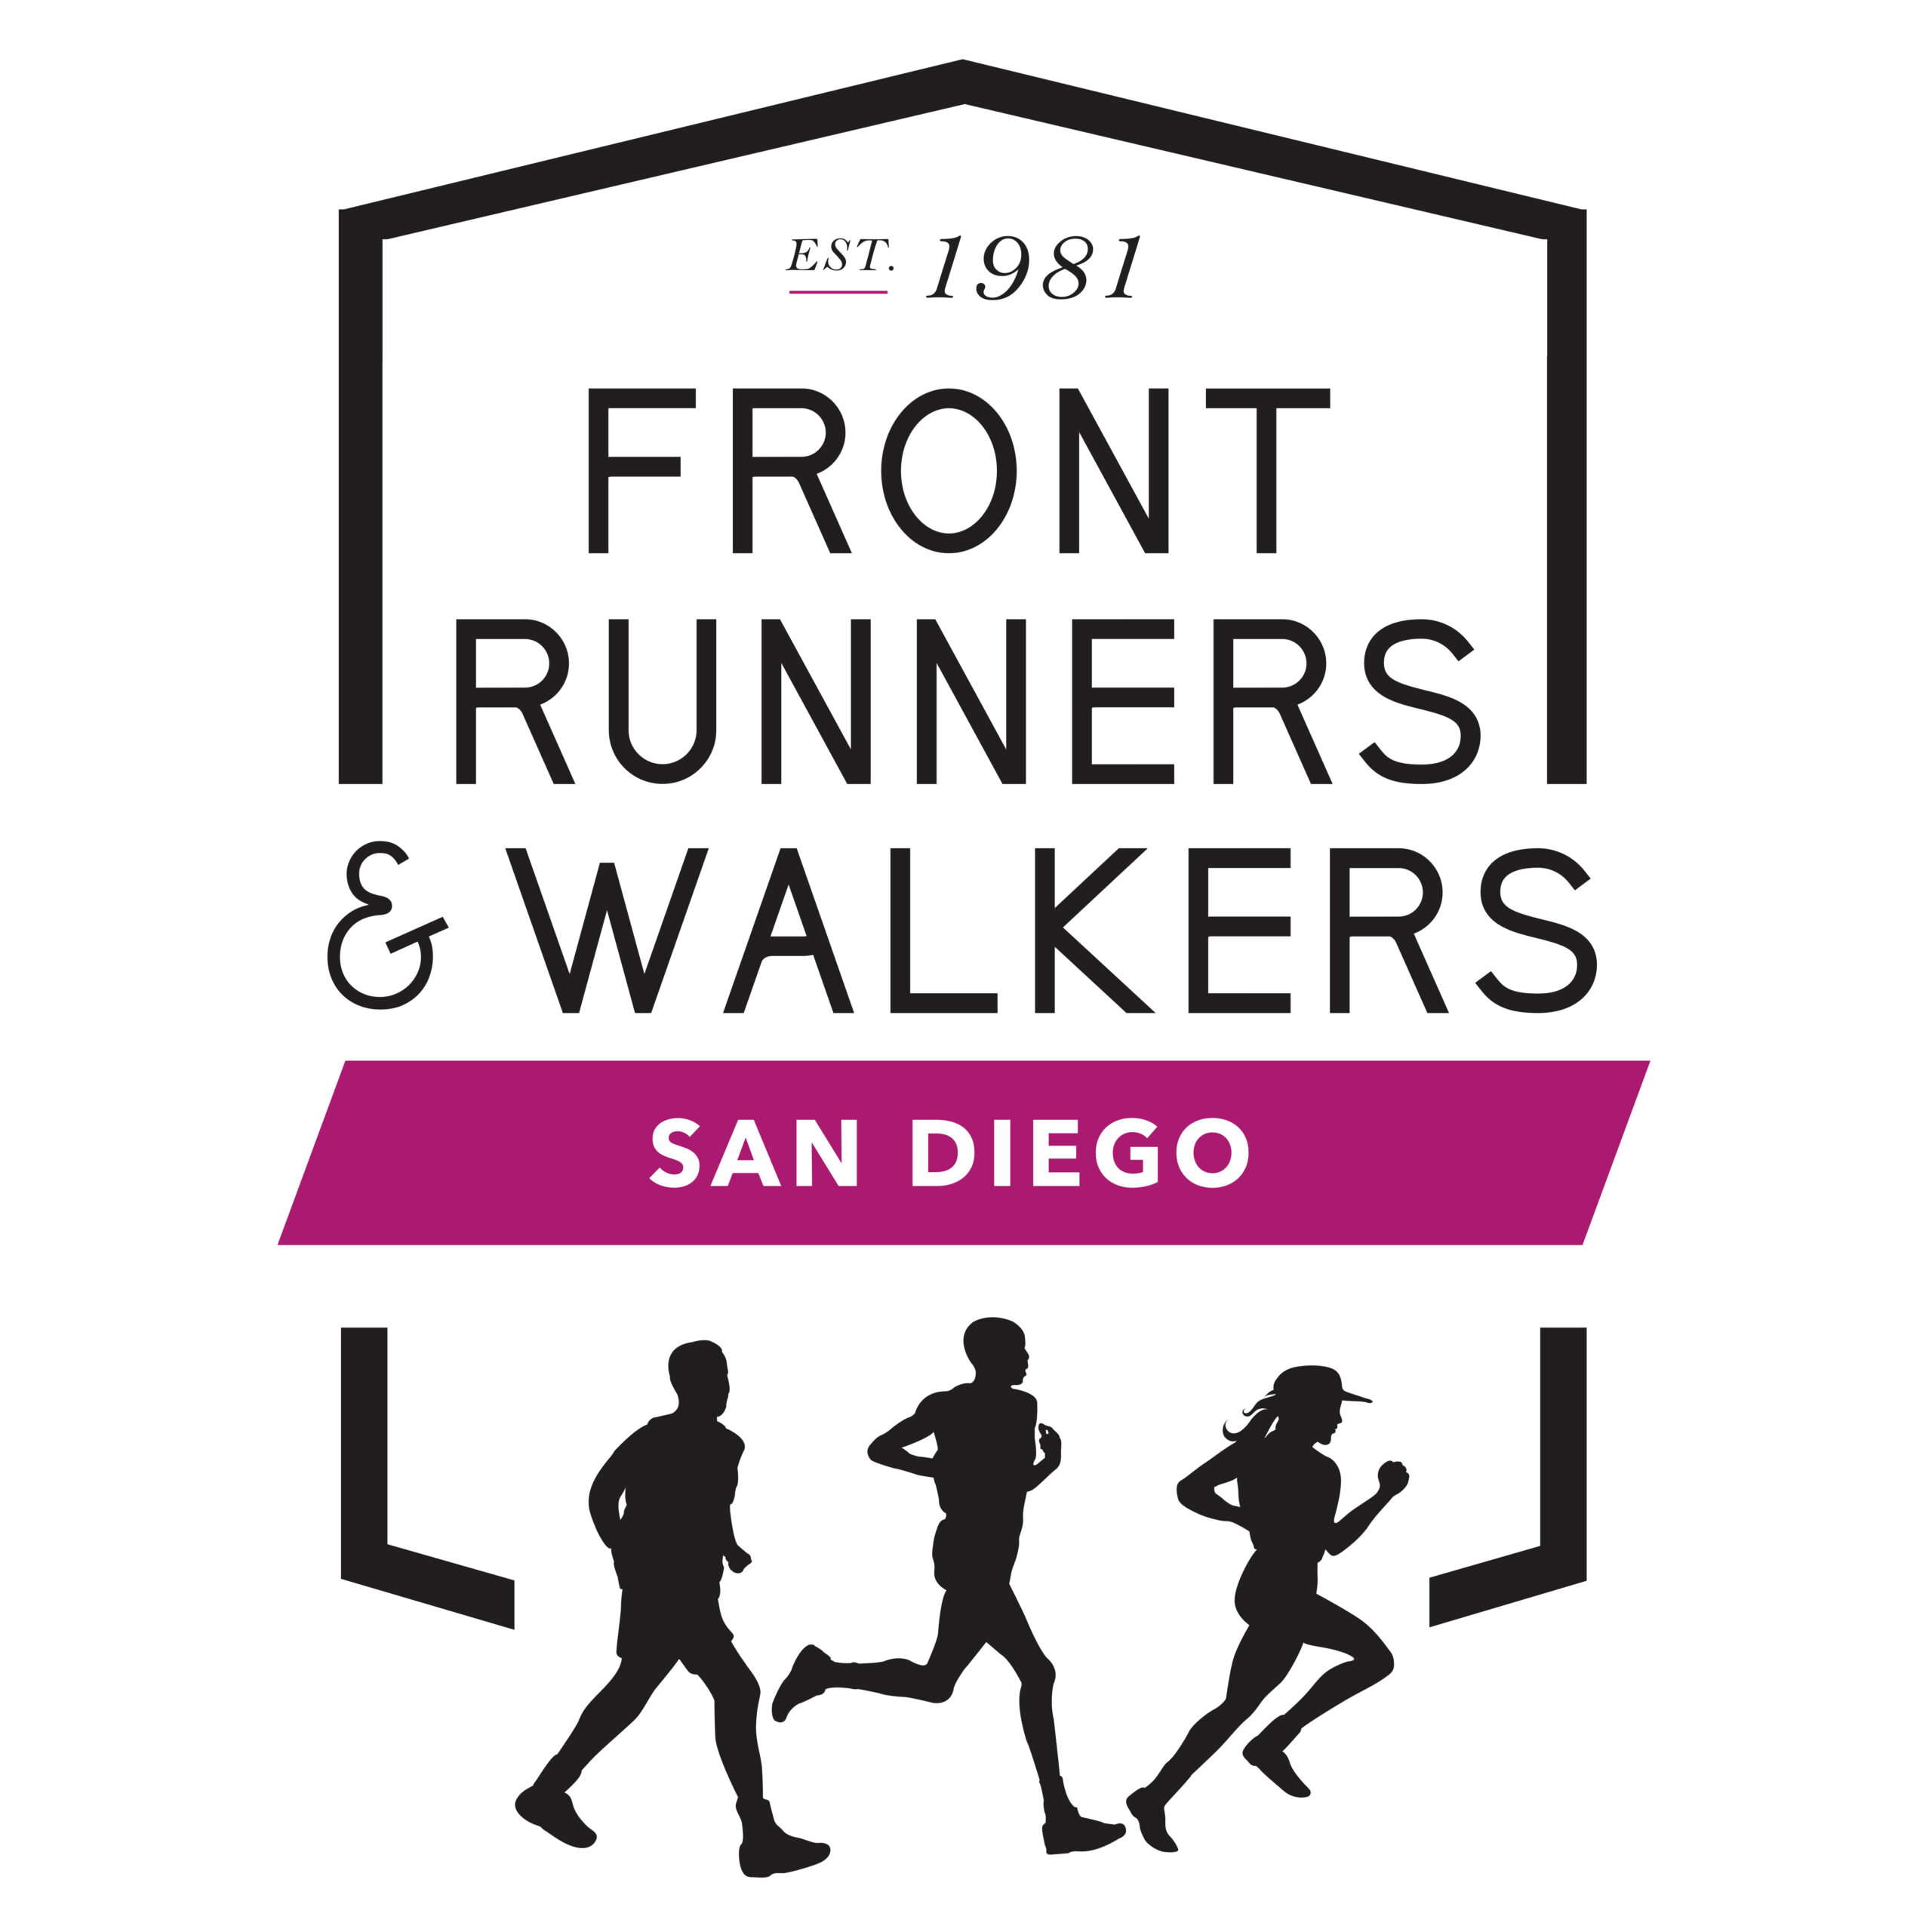 Frontrunners